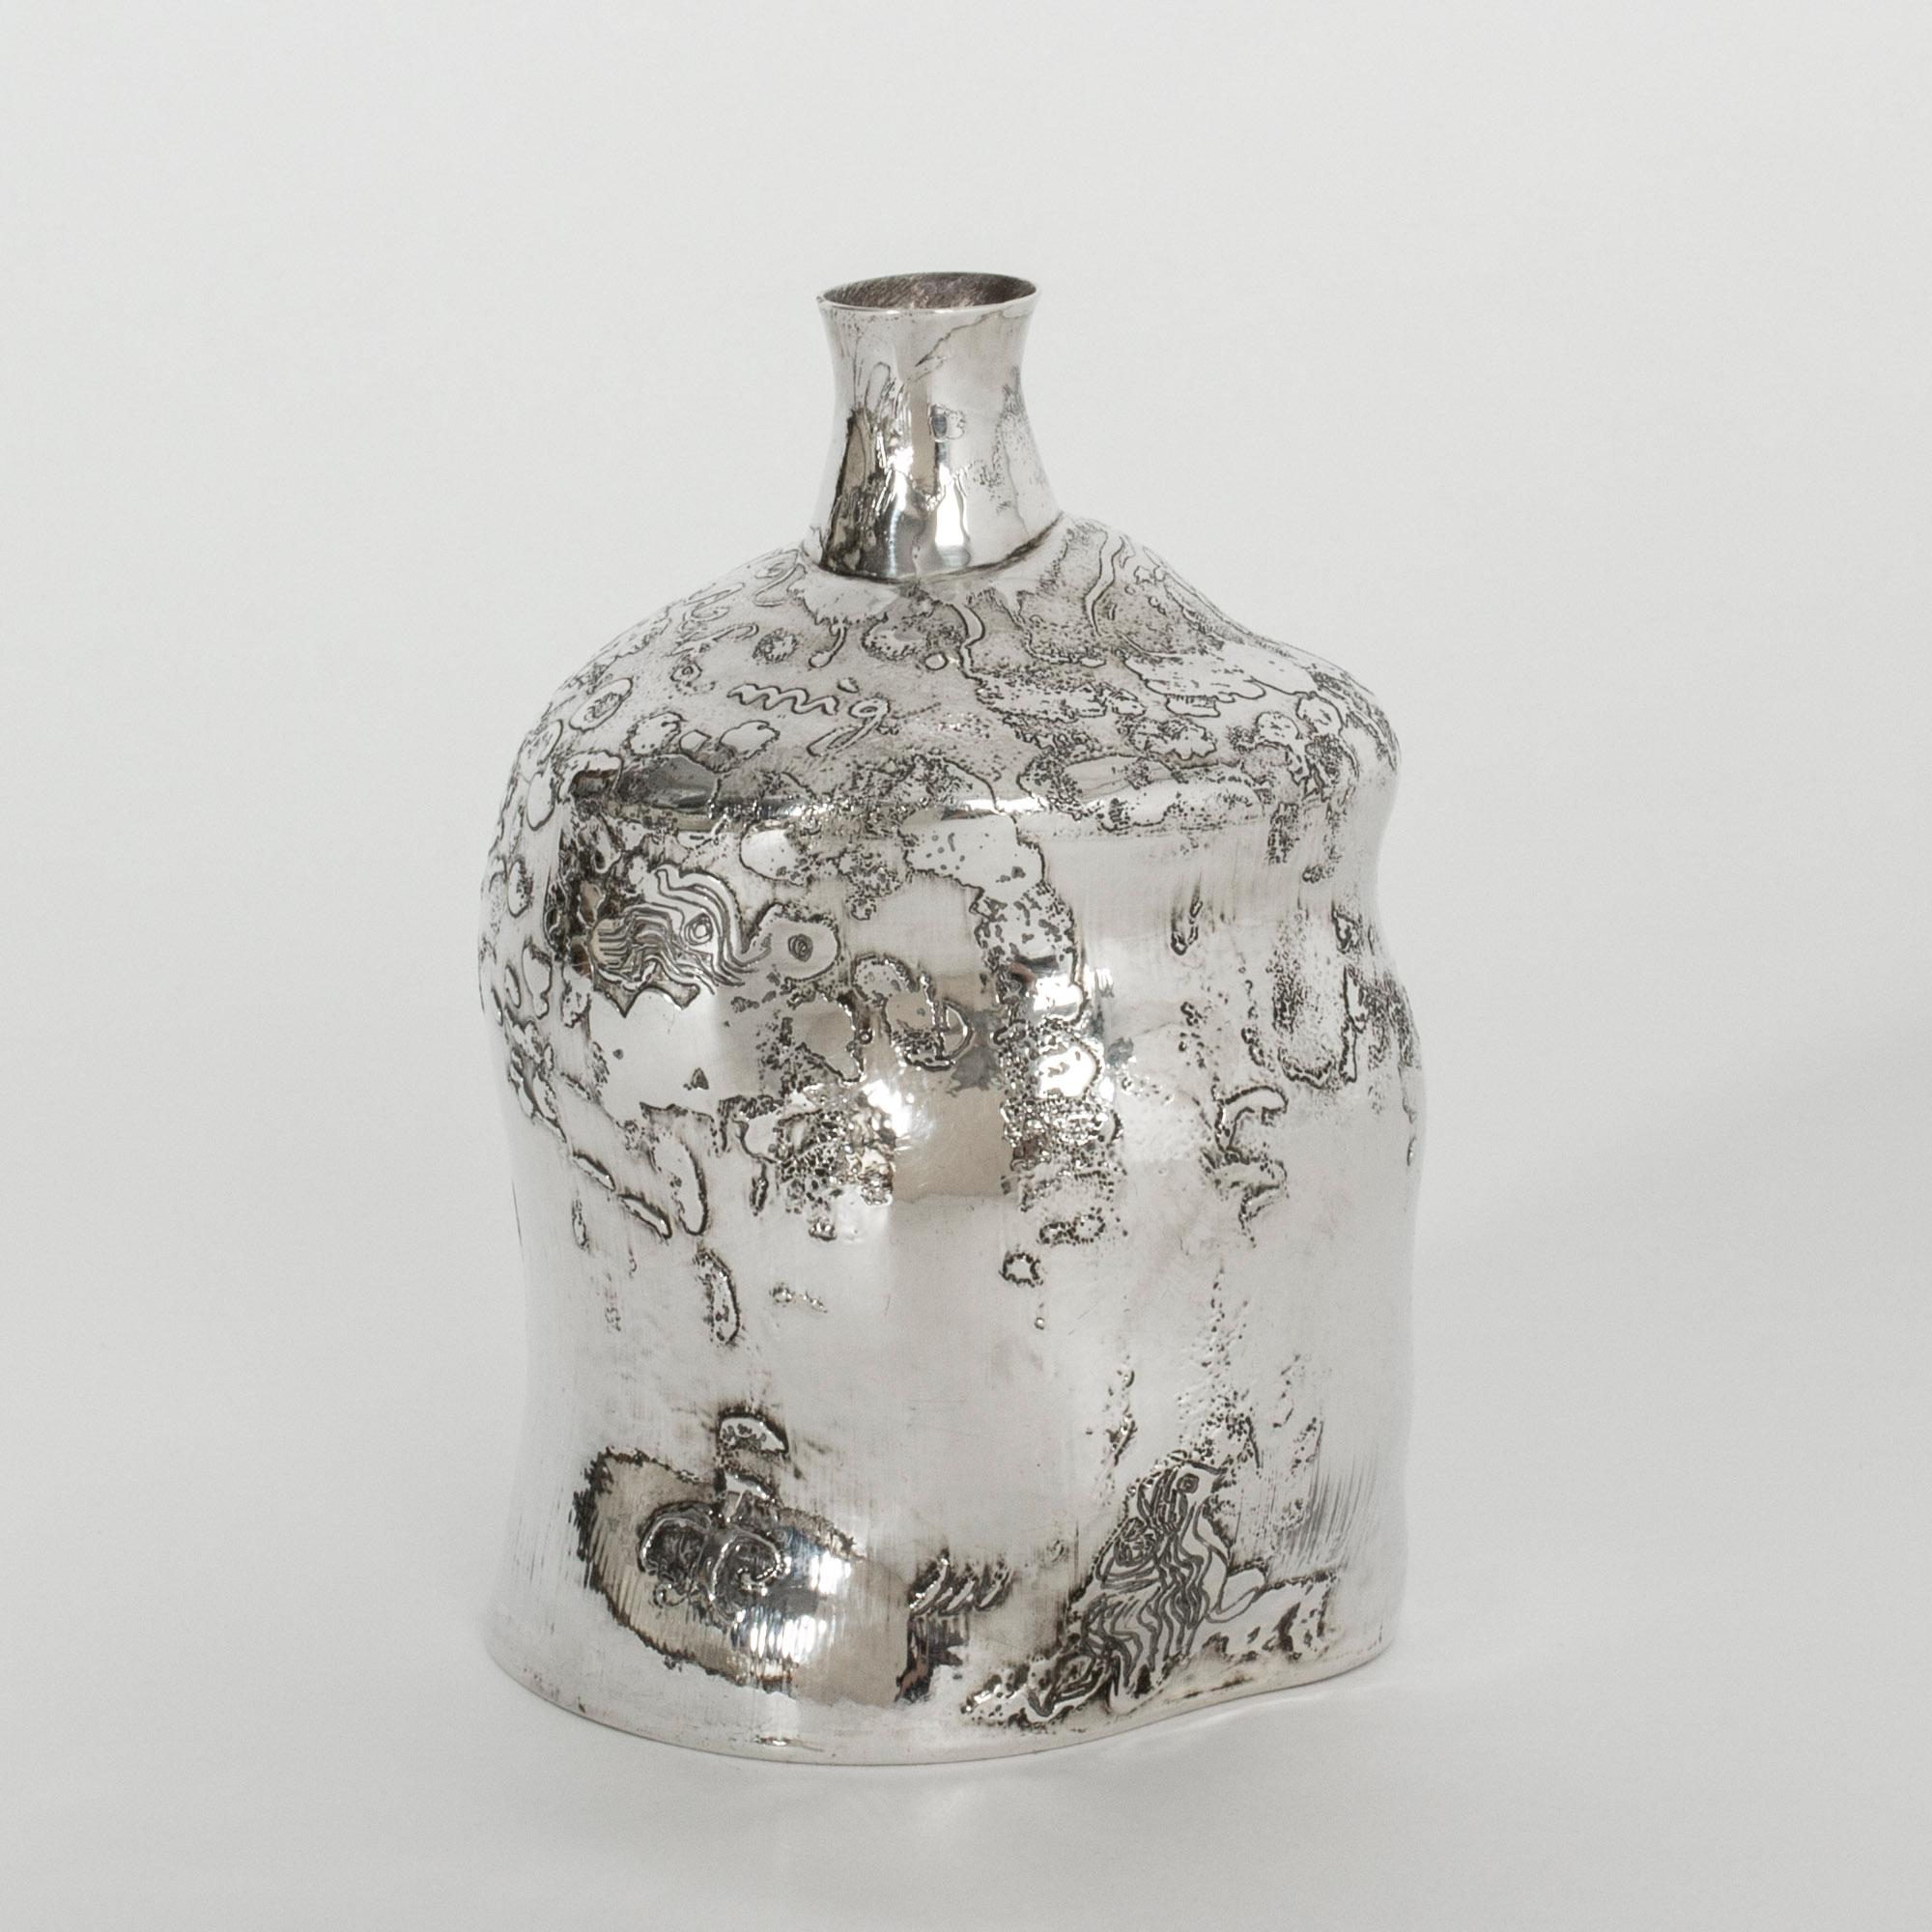 Amazing asymmetric silver bottle or vase by Olle Ohlsson with a flowing shape. The surface has been treated with acid to create an organic pattern, in which Ohlsson has etched faces, letters and lines. A piece with many beautiful, enigmatic details